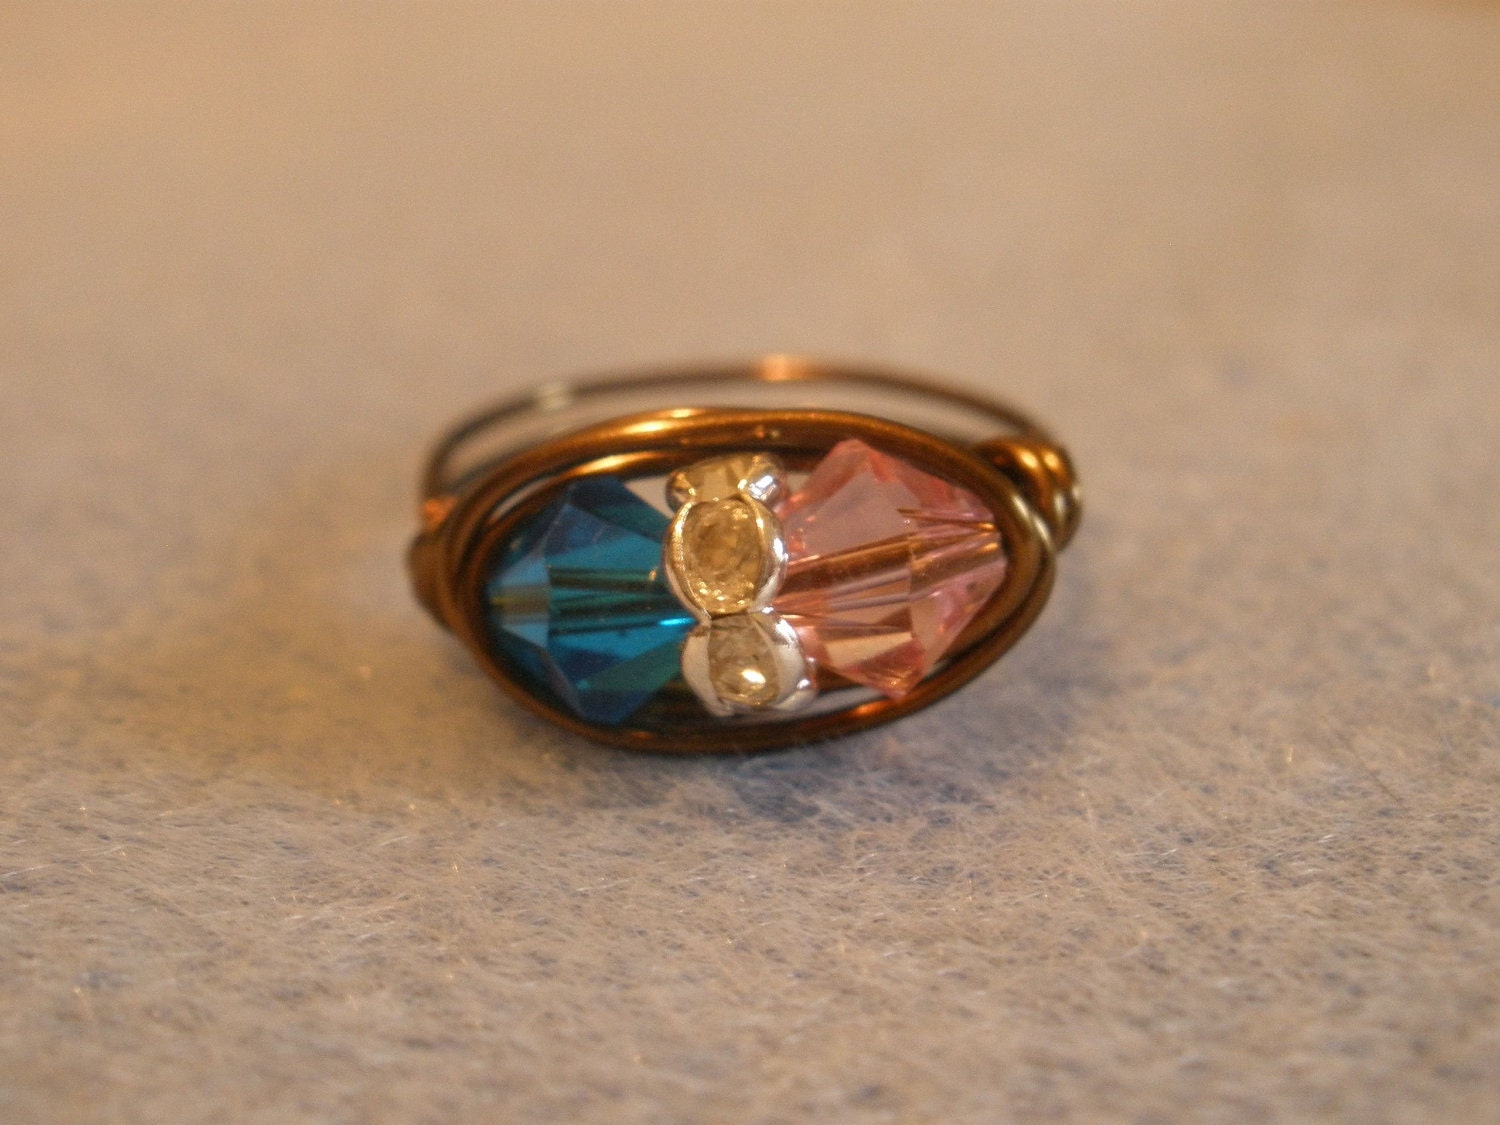 Delta Gamma Hand Wrapped Ring in Pink, Blue, and Bronze